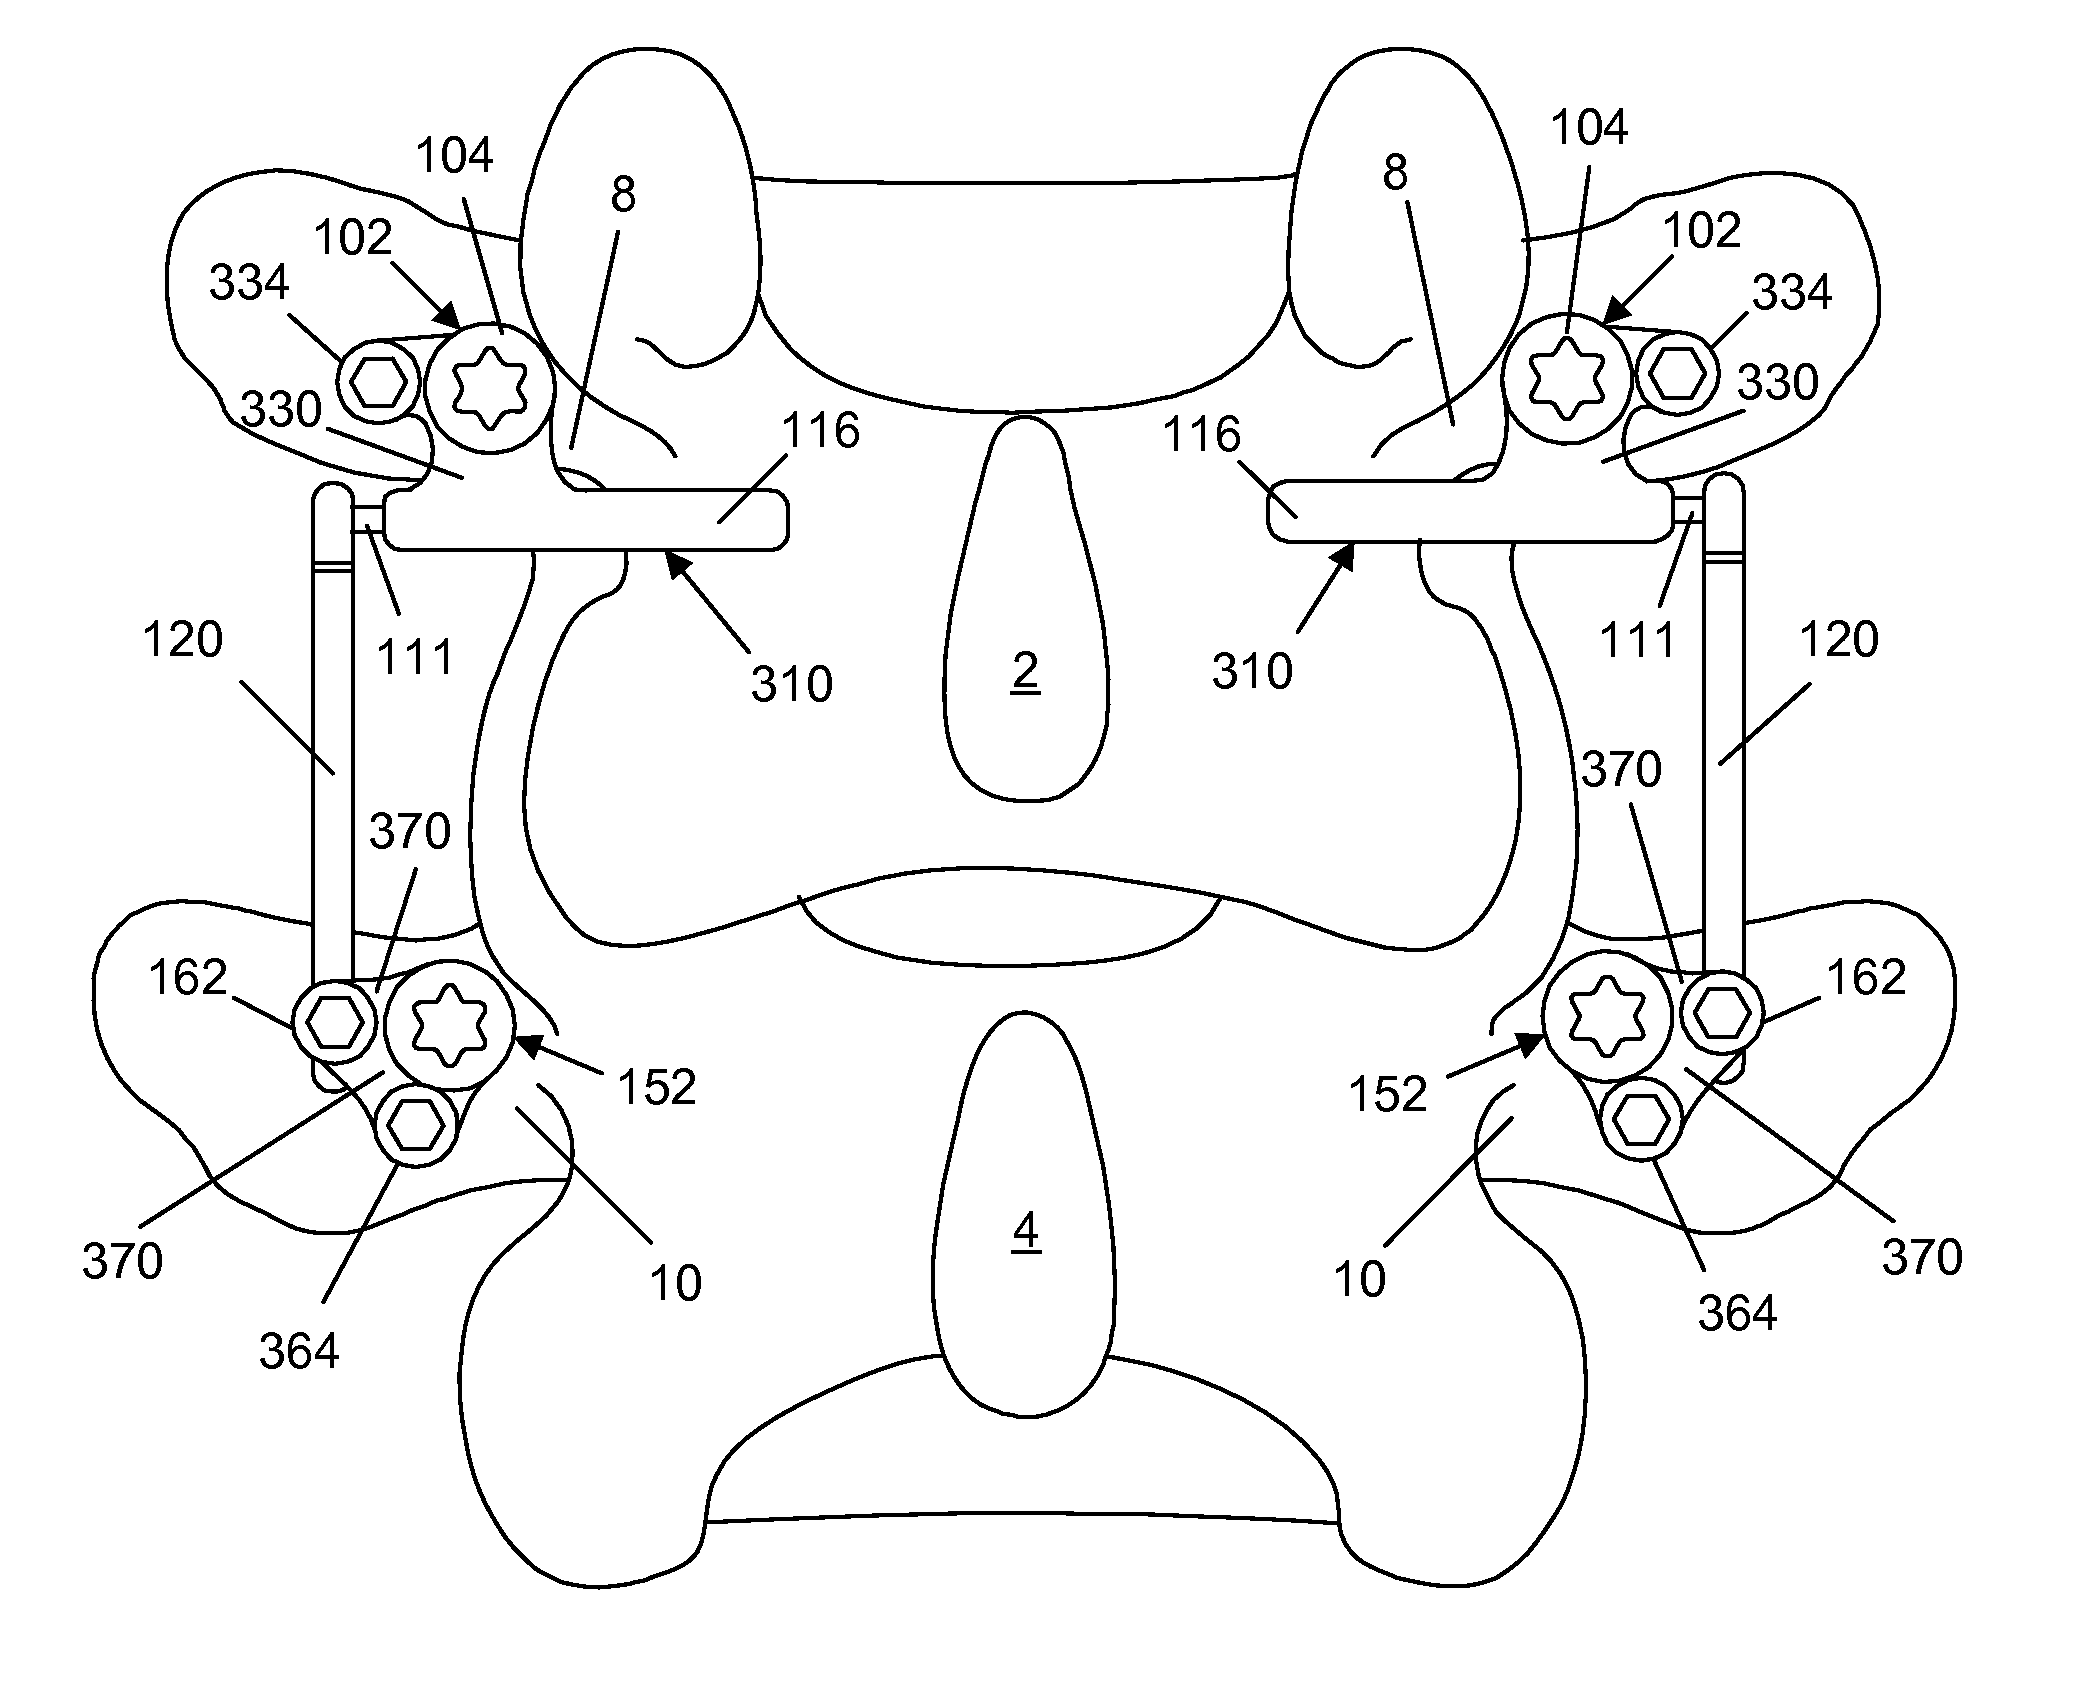 Spine implant with a deflection rod system including a deflection limiting shield associated with a bone screw and method